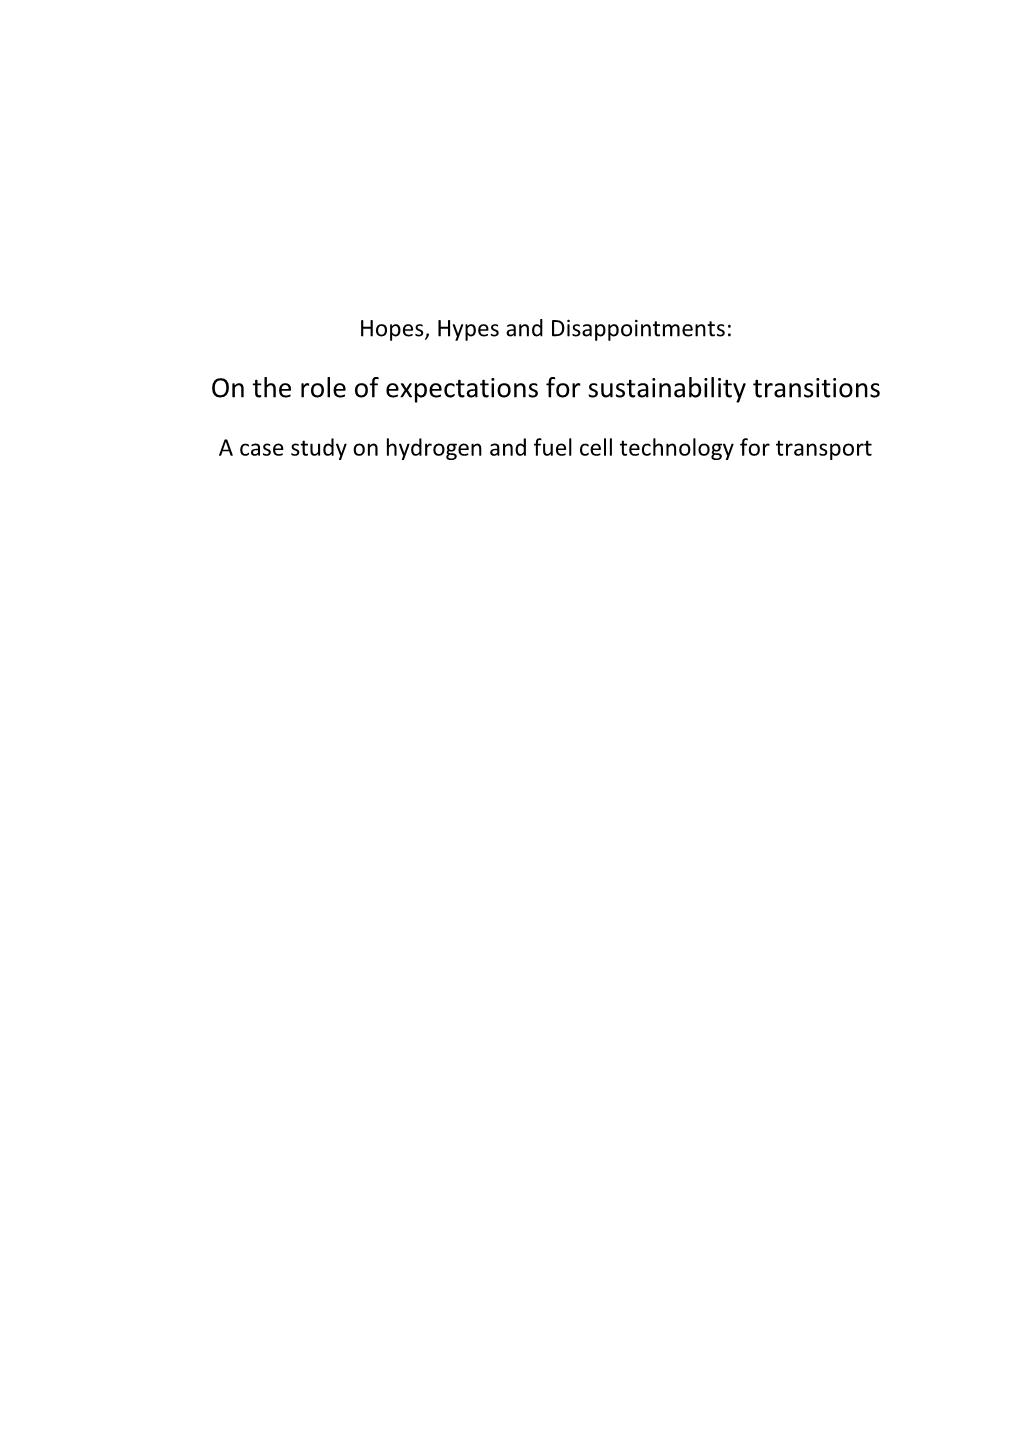 On the Role of Expectations for Sustainability Transitions